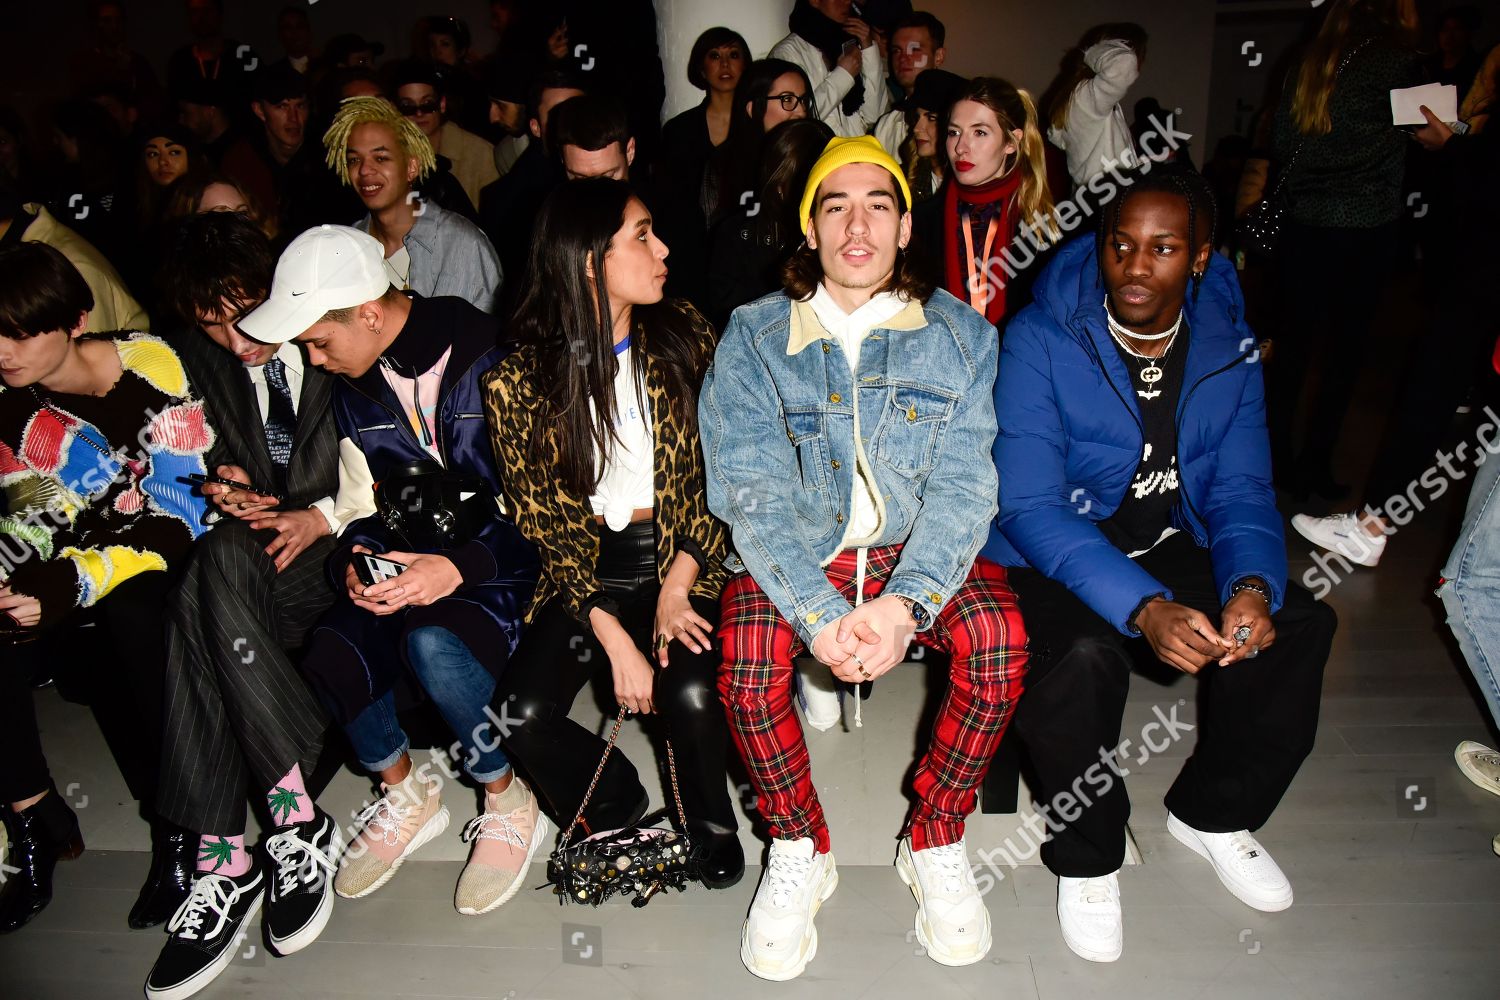 Hector Bellerin on the front row during the Alex Mullins London